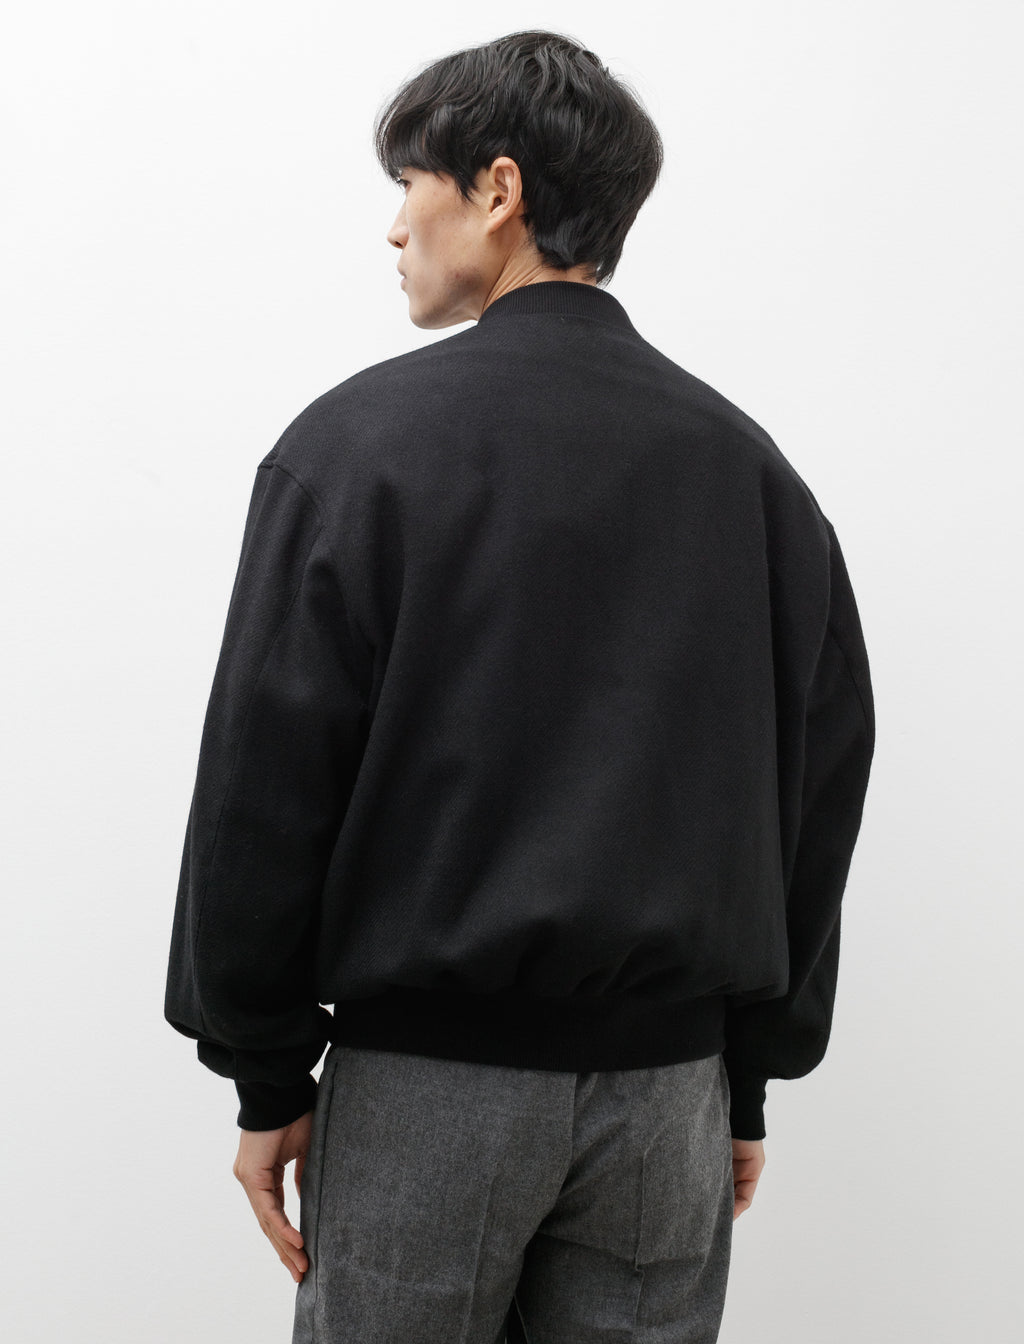 POLYPLOID / BOMBER JACKET TYPE C 20AW - ブルゾン